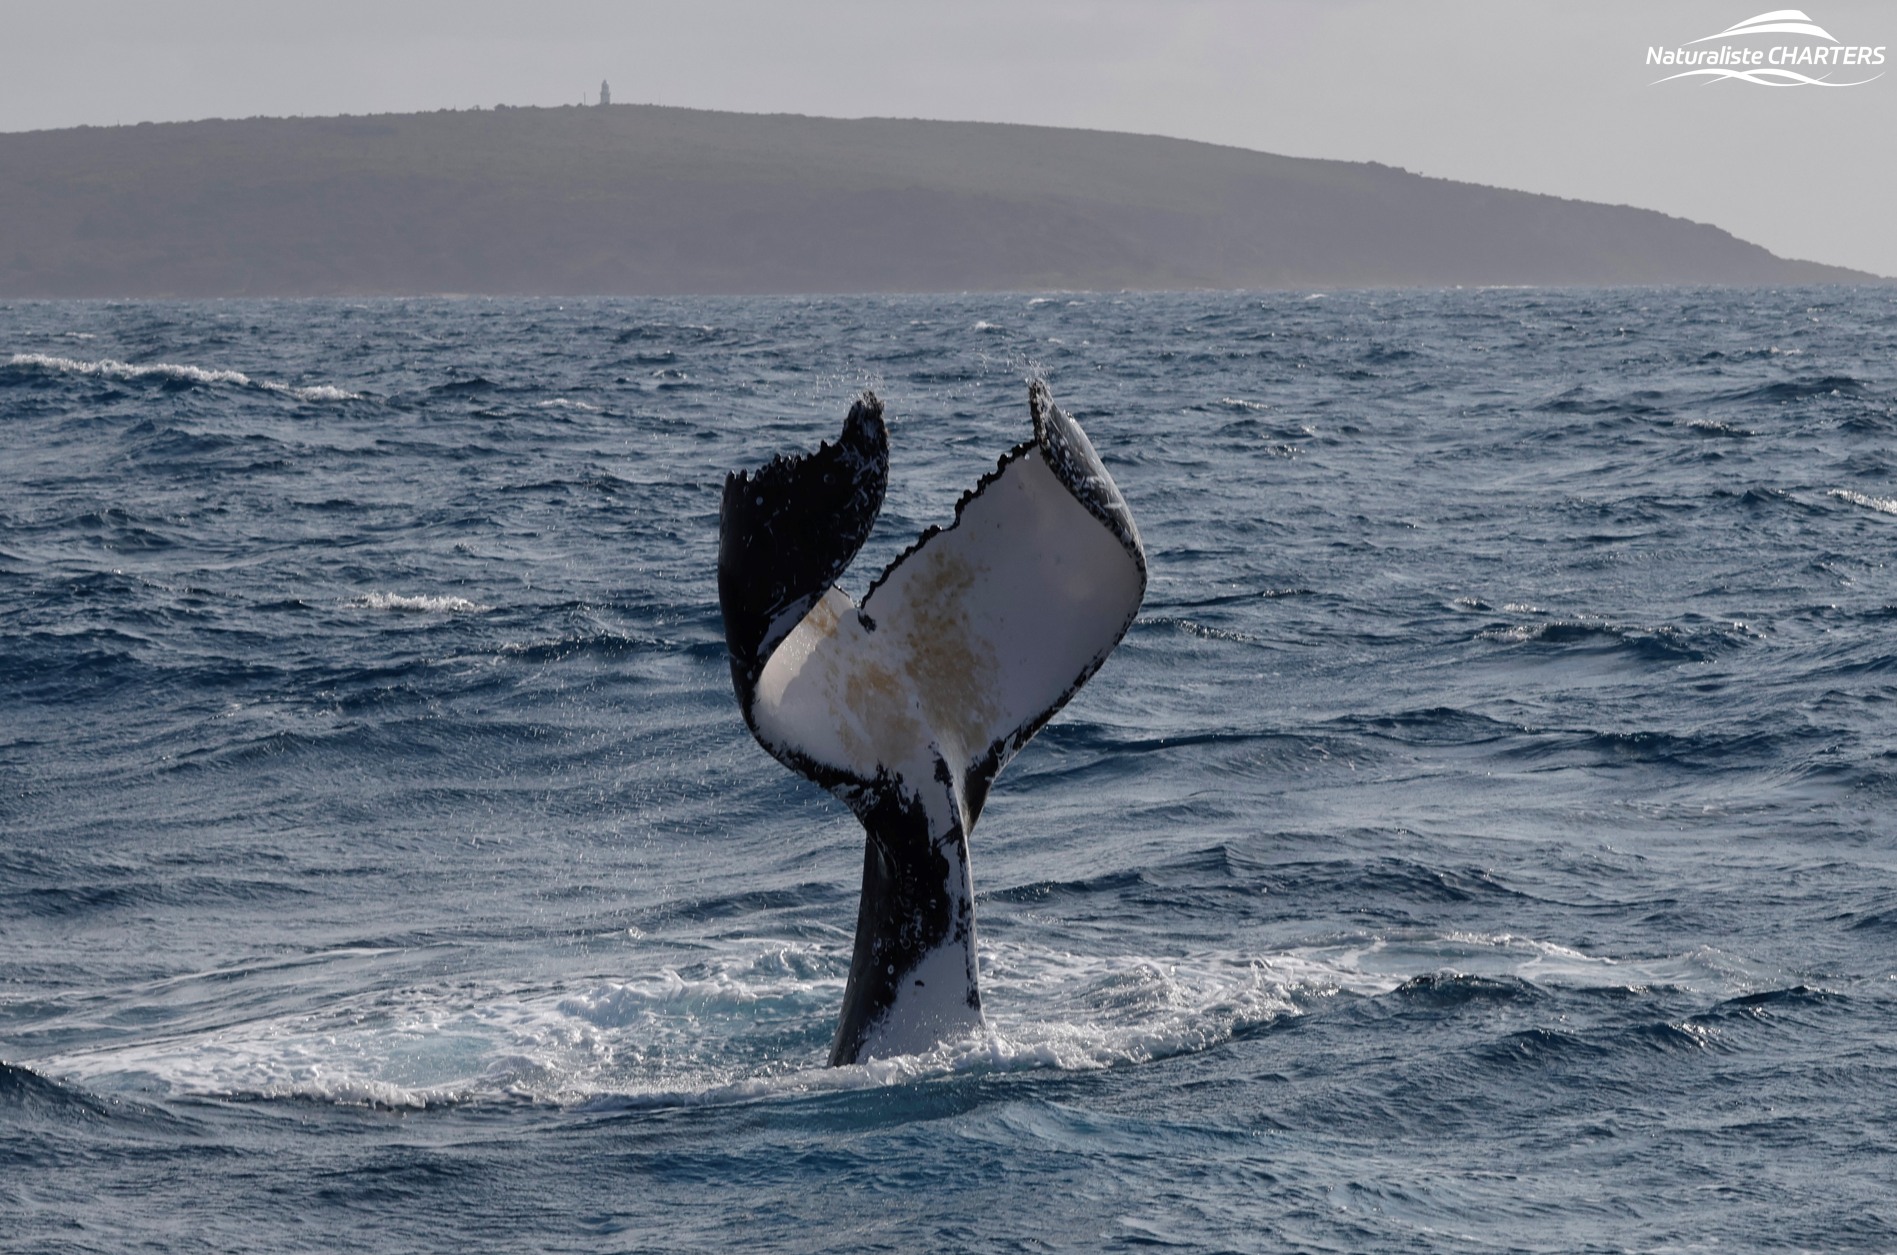 A glimpse of the tail of a humpback whale on a whale watching tour